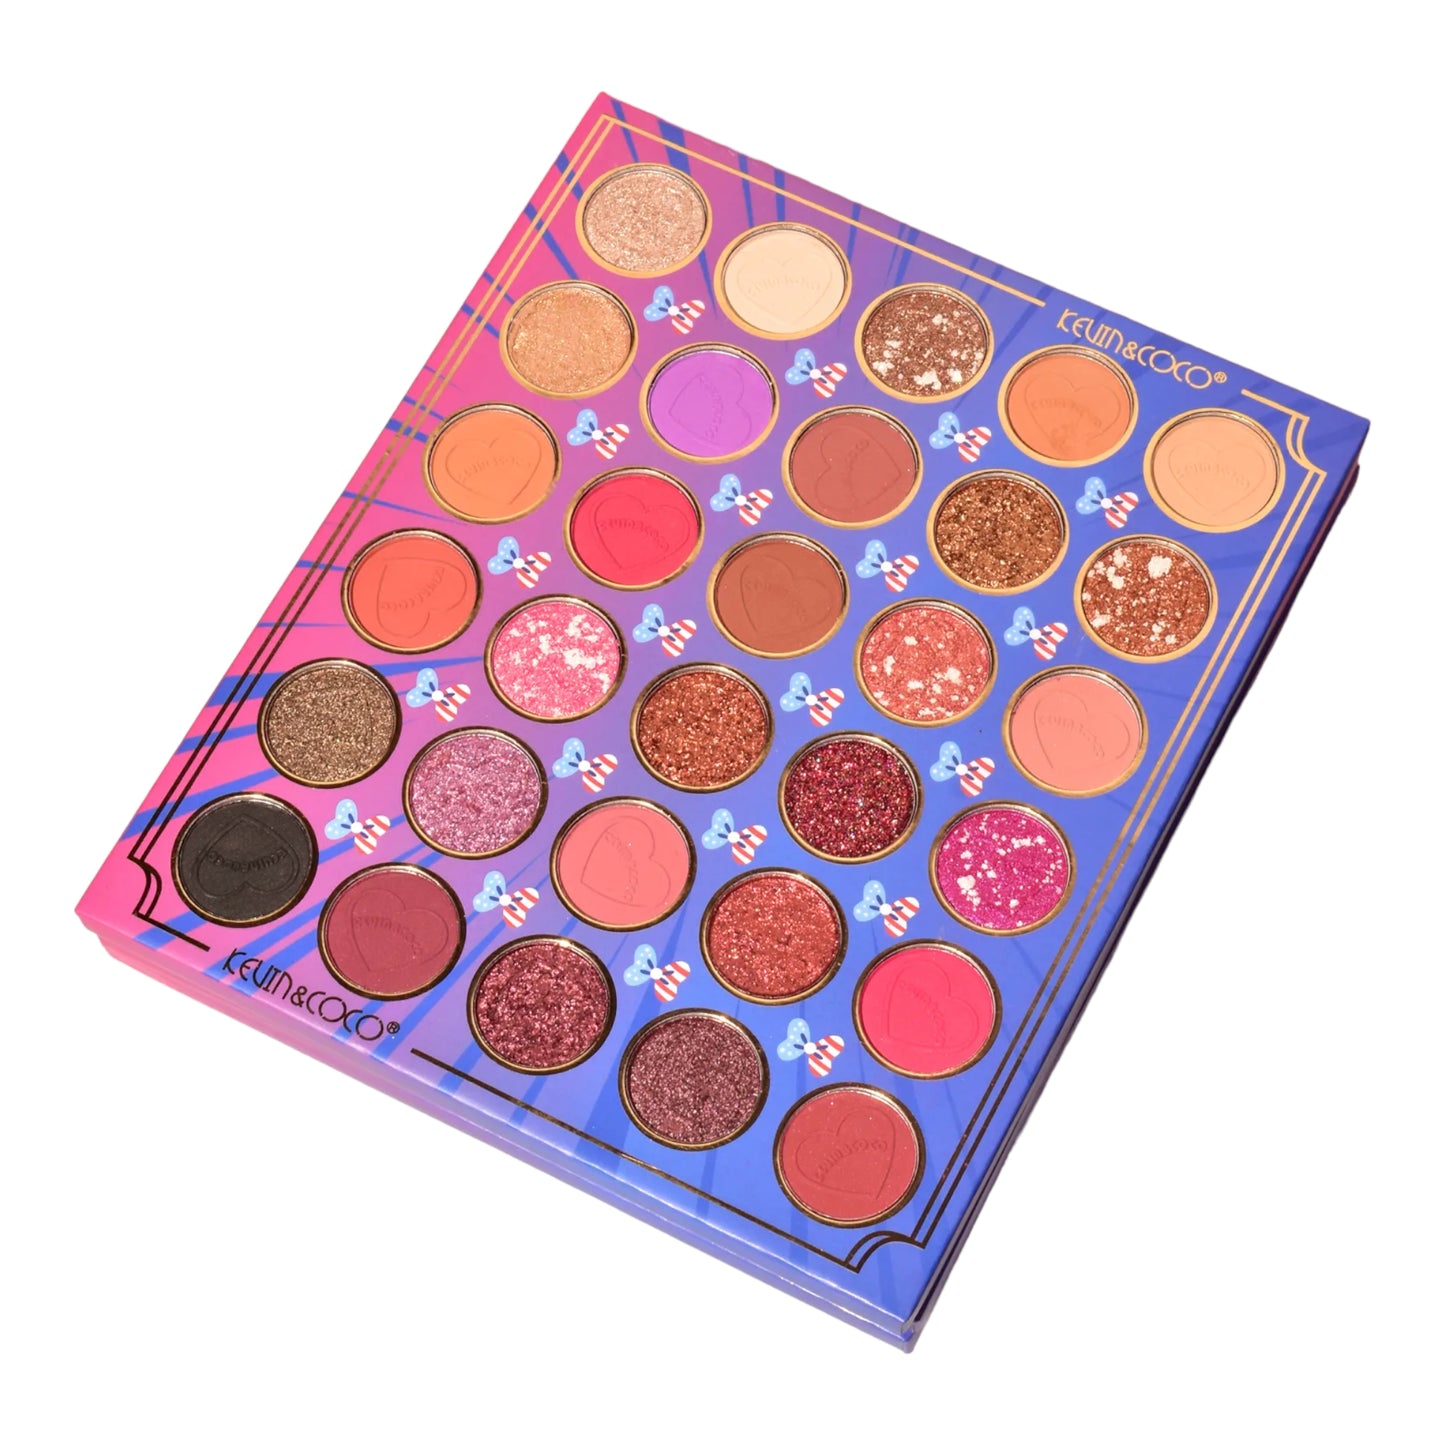 KEVIN&COCO INDEPENDENCE DAY 102 COLOR FASHION EYESHADOW PALETTE KC234400 R9